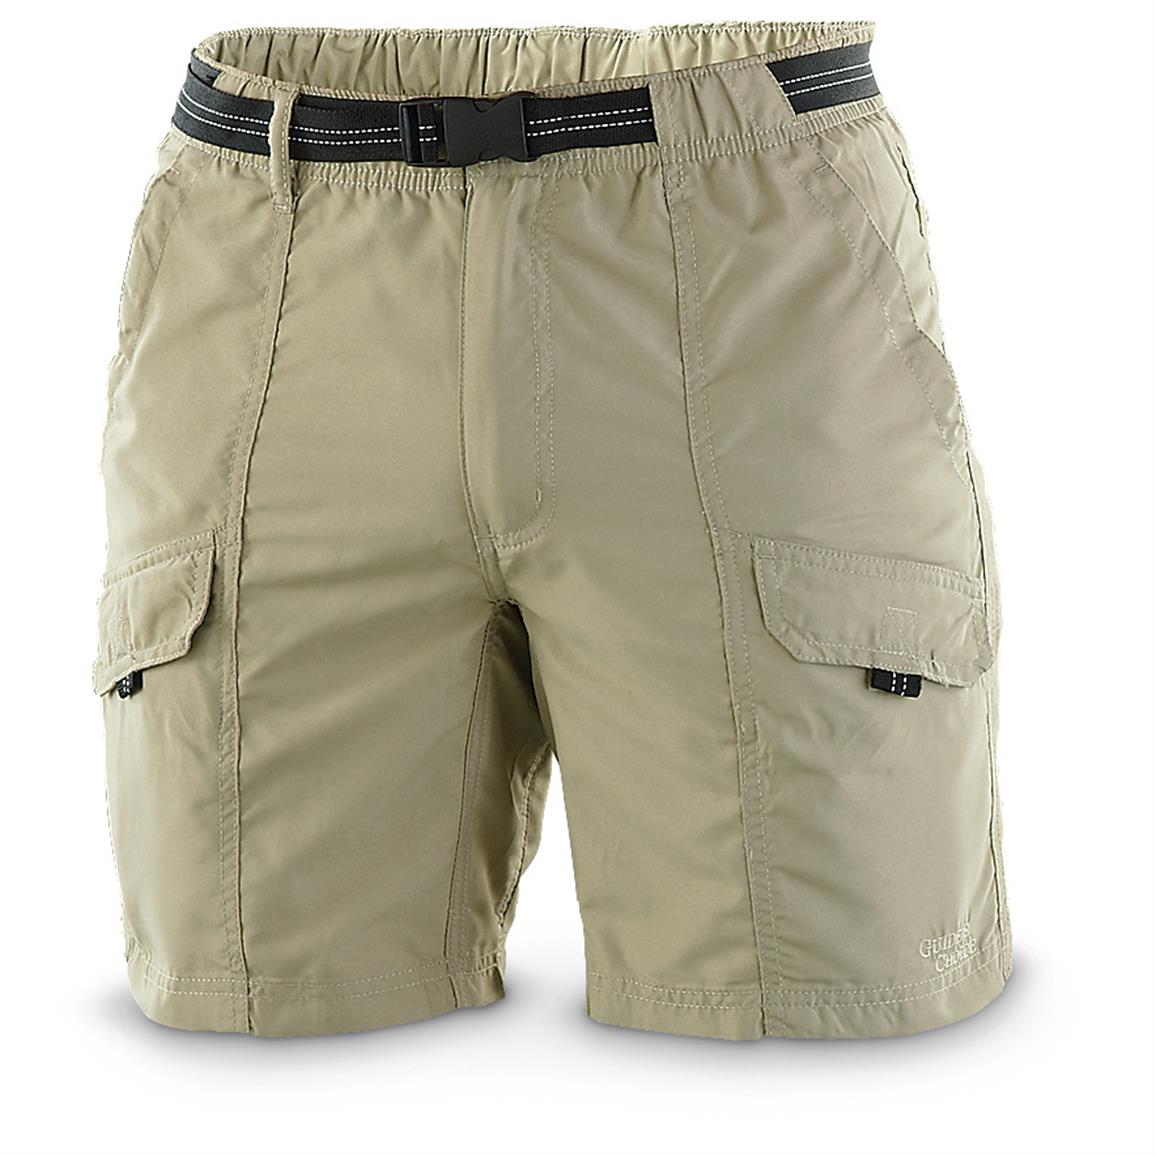 Guide's Choice Men's River Shorts - 621023, Shorts at Sportsman's Guide